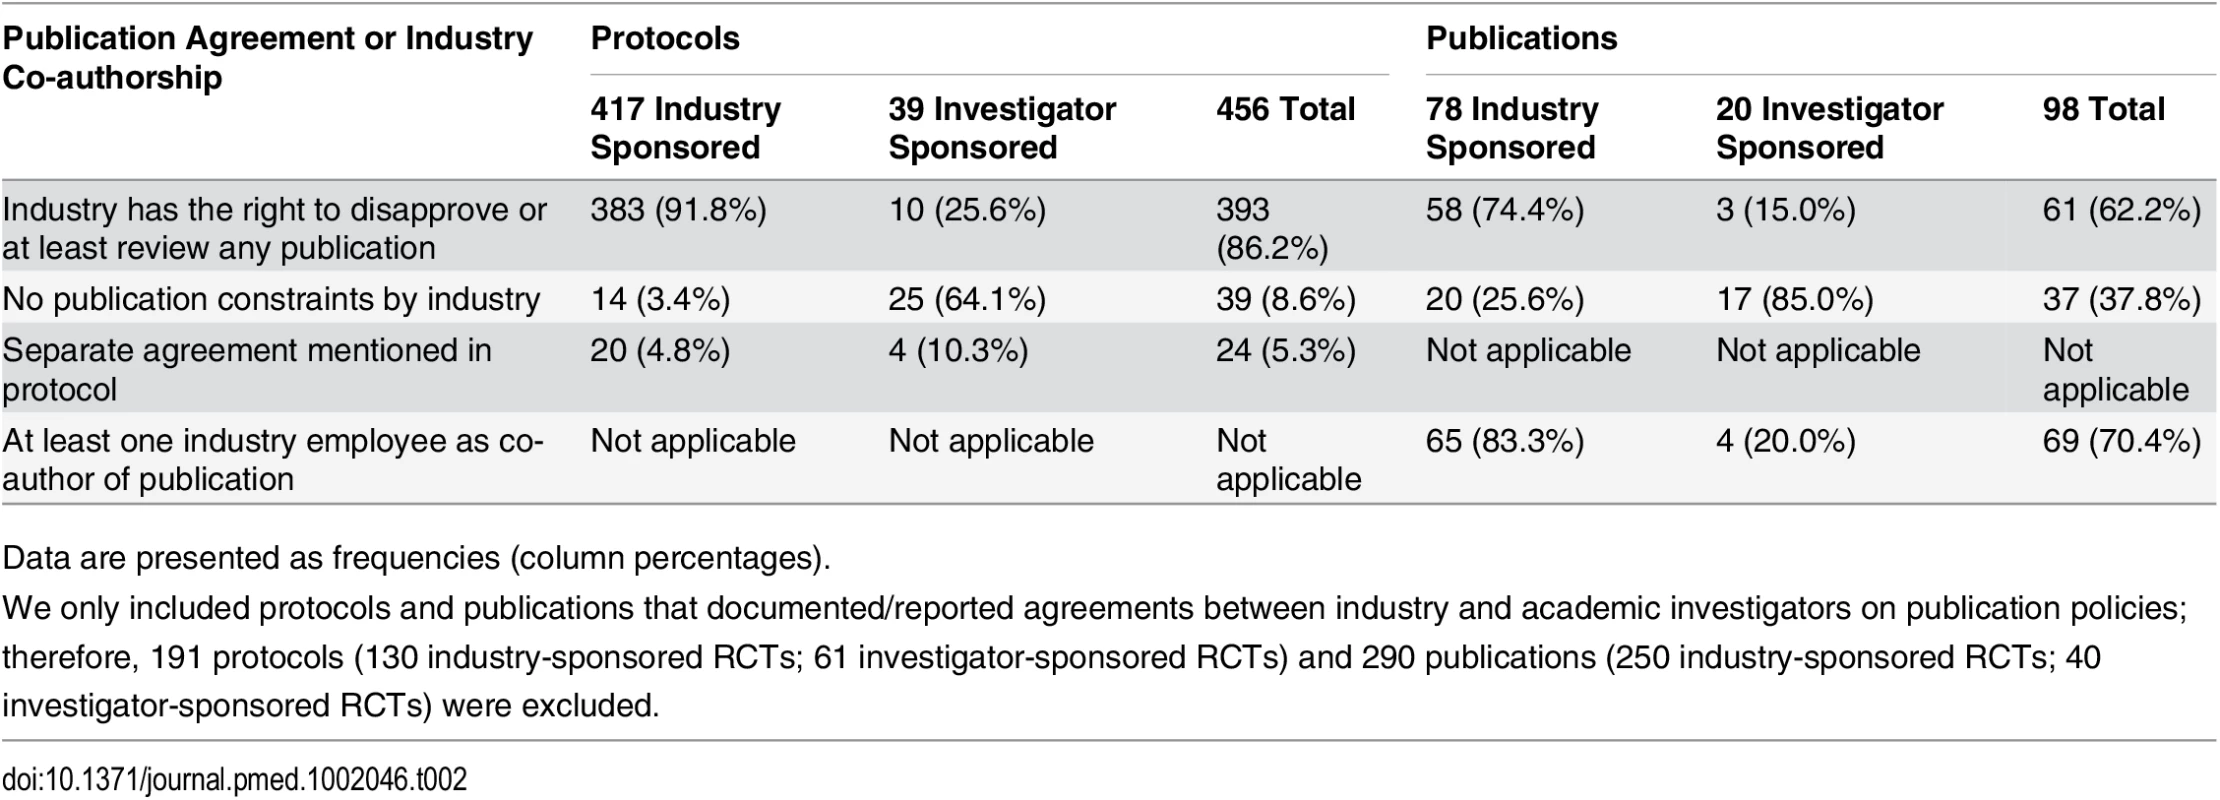 Types of publication agreements and industry employee co-authorship as documented in trial protocols and reported in journal publications.